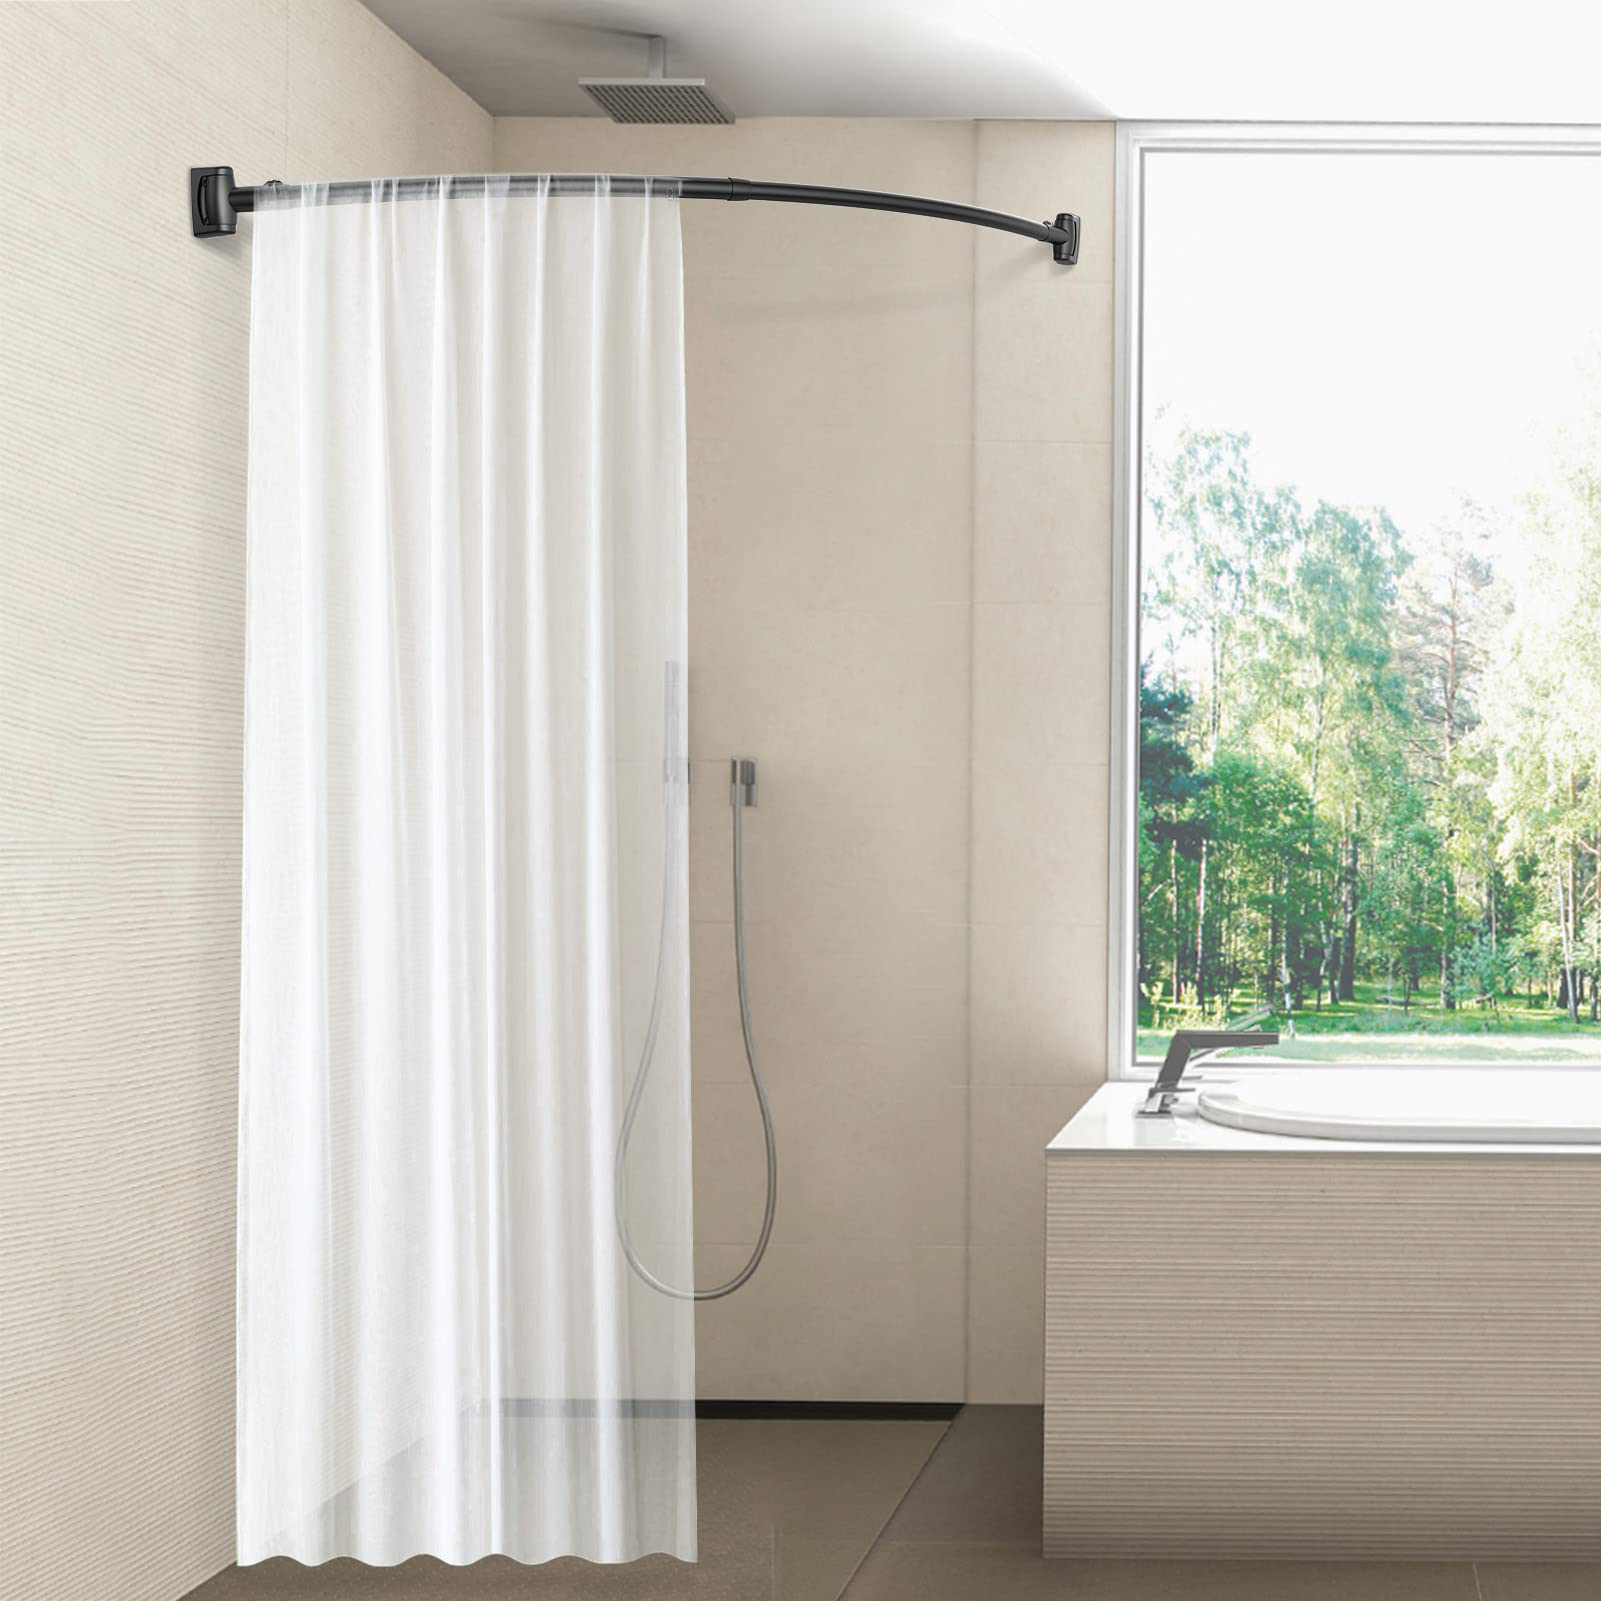 Telescoping Design Adjustable Curved Shower Curtain Rod Adds Space and Adjusts from 50 in to 72 in